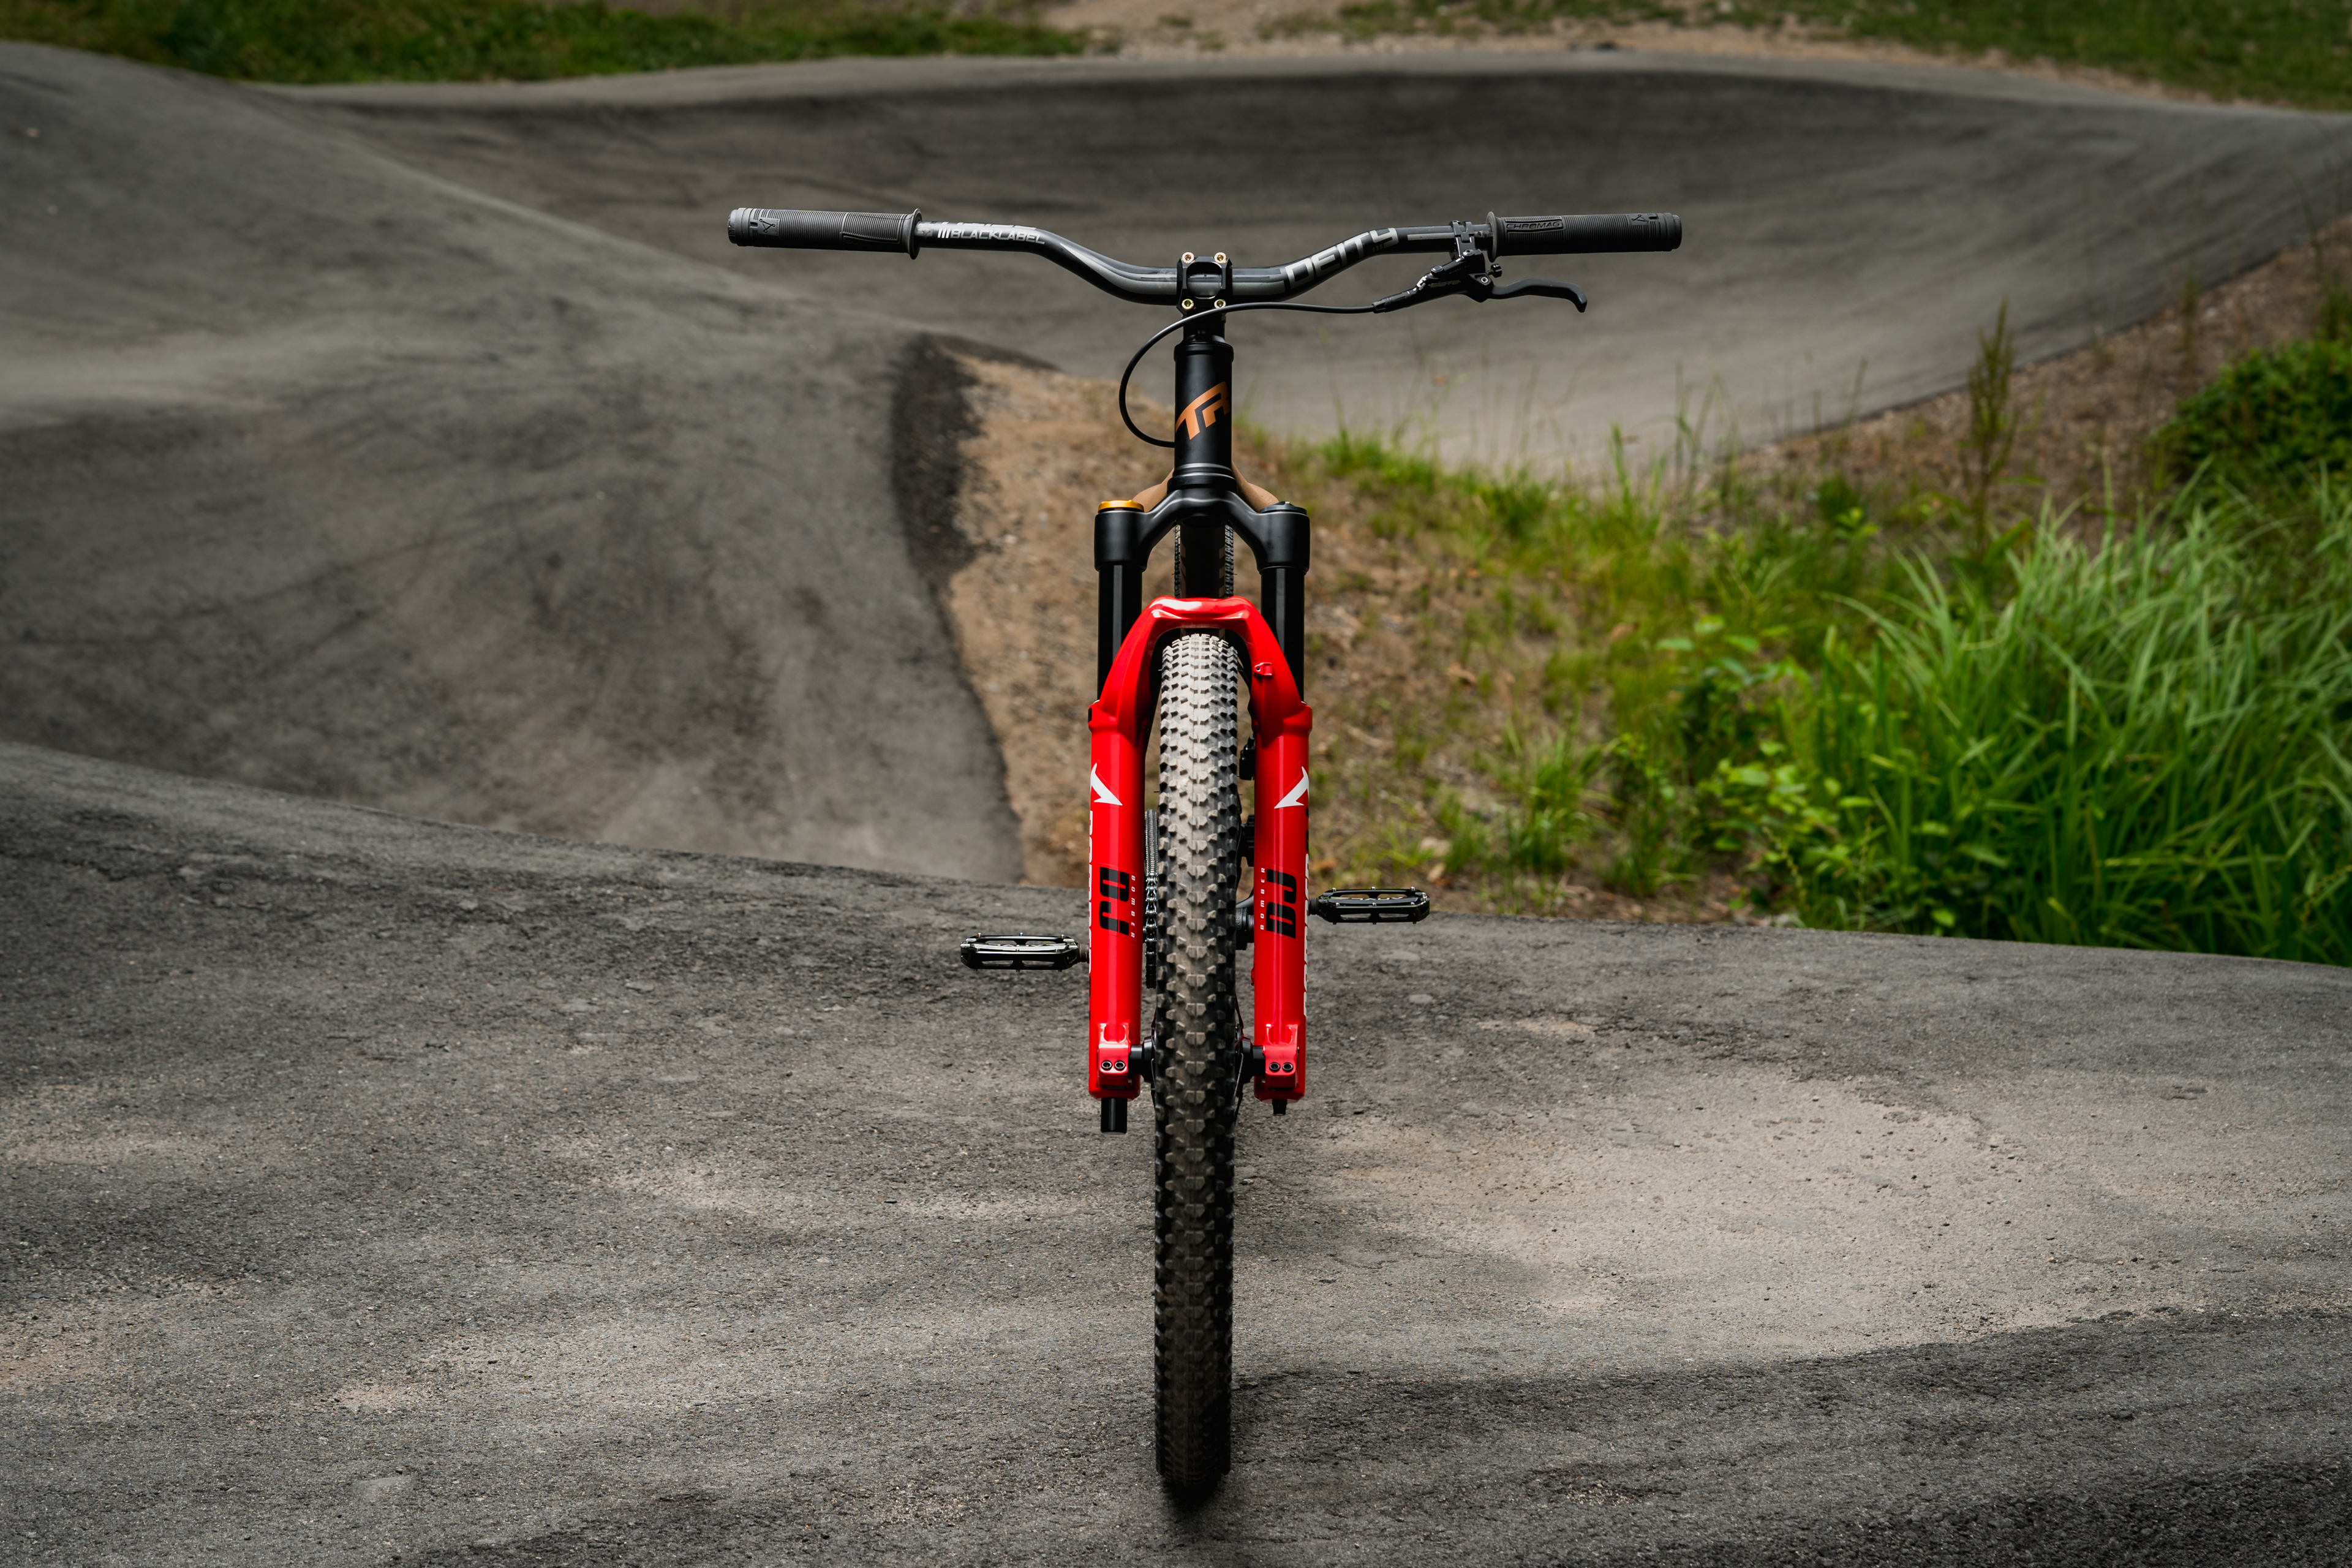 Front of the Marzocchi Bomber DJ fork on Transition PBJ bike shot by A.J. Barlas at the Squamish Casino pumptrack